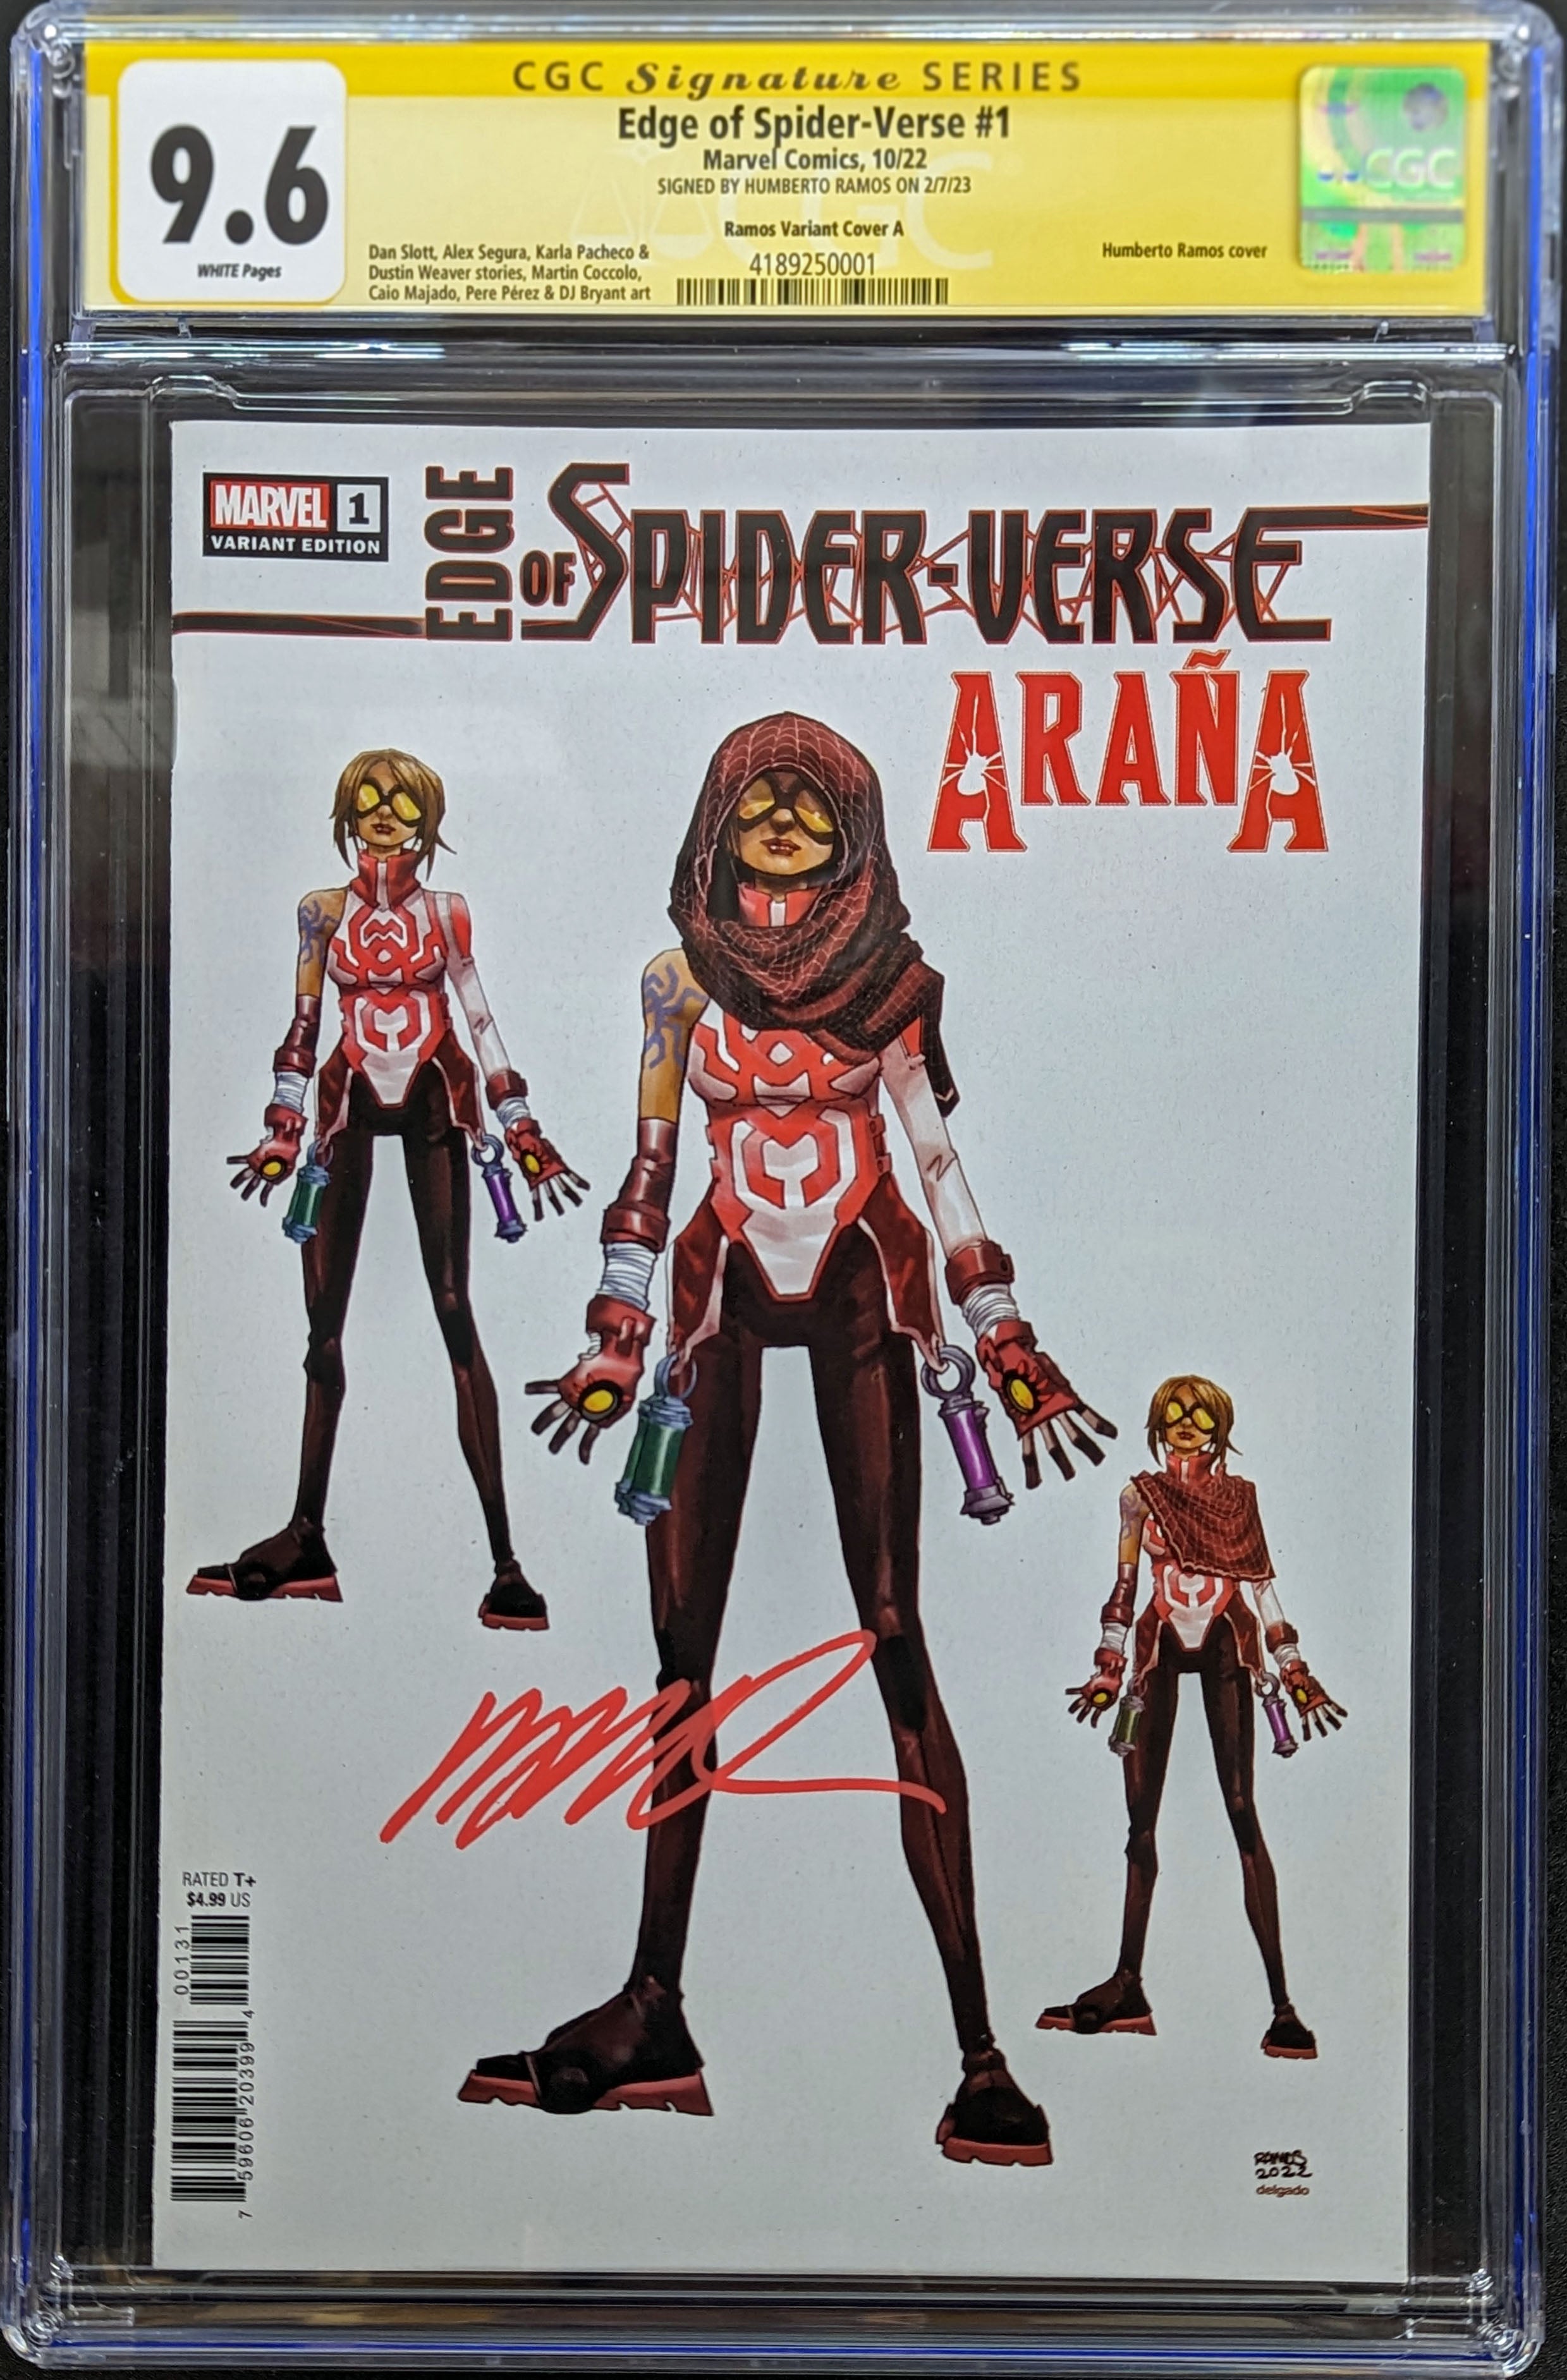 Edge Of Spider-Verse #1 Design Variant Edition CGC 9.6 Signed by Humberto Ramos